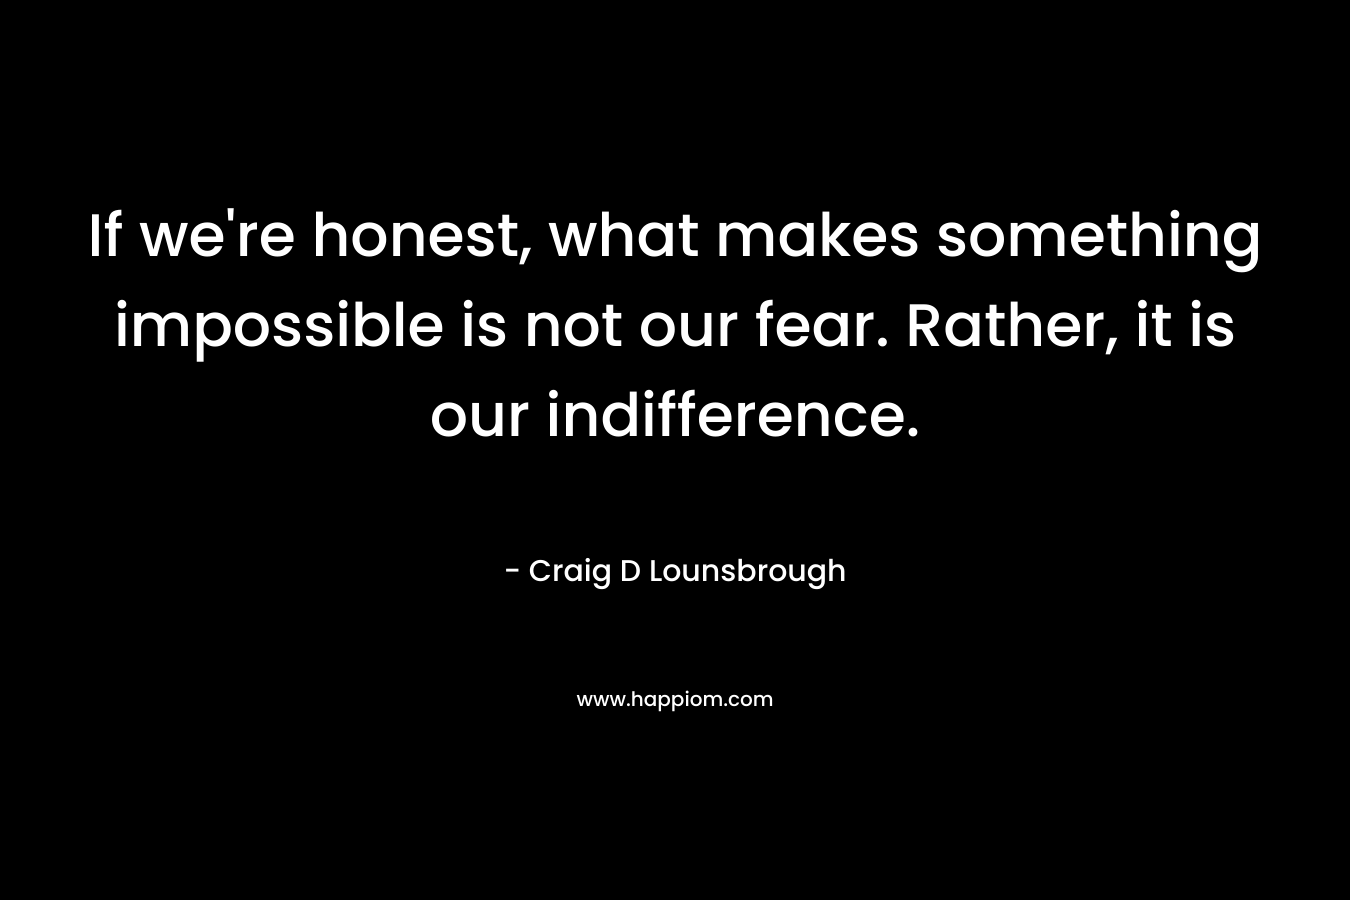 If we're honest, what makes something impossible is not our fear. Rather, it is our indifference.